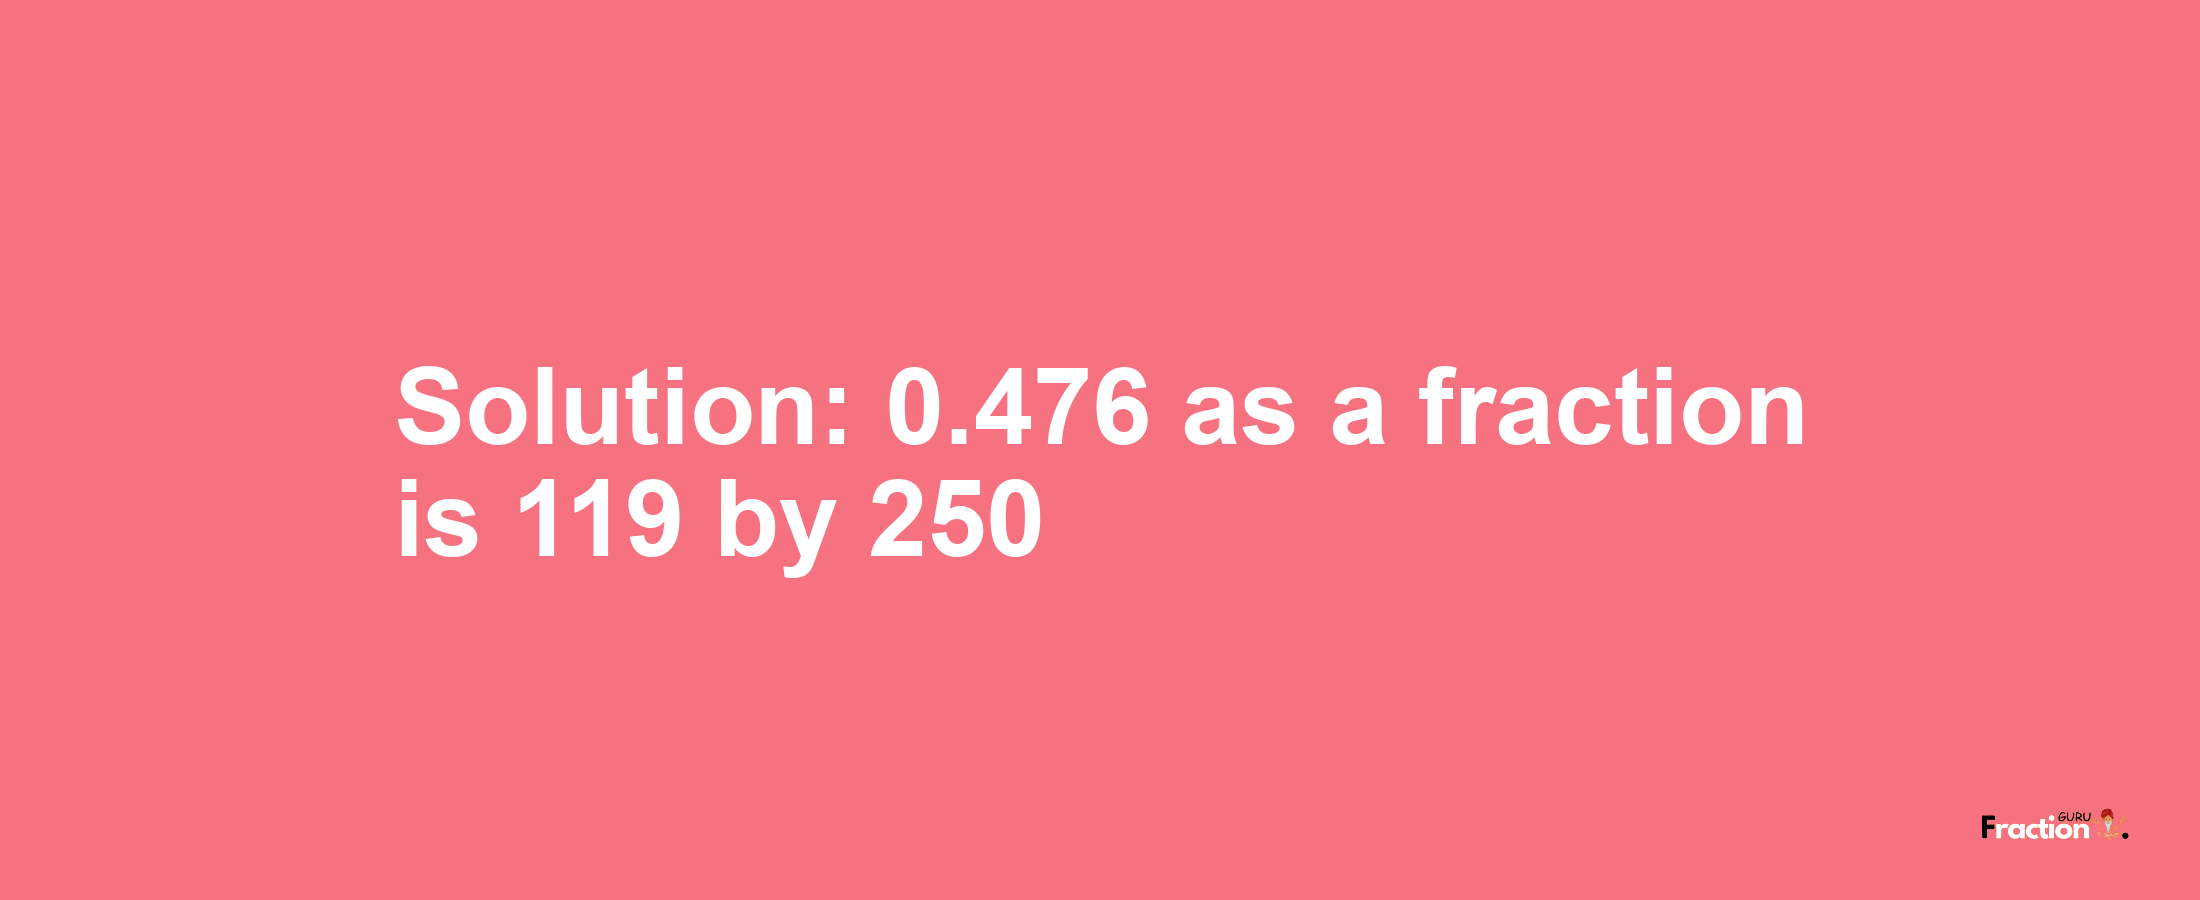 Solution:0.476 as a fraction is 119/250